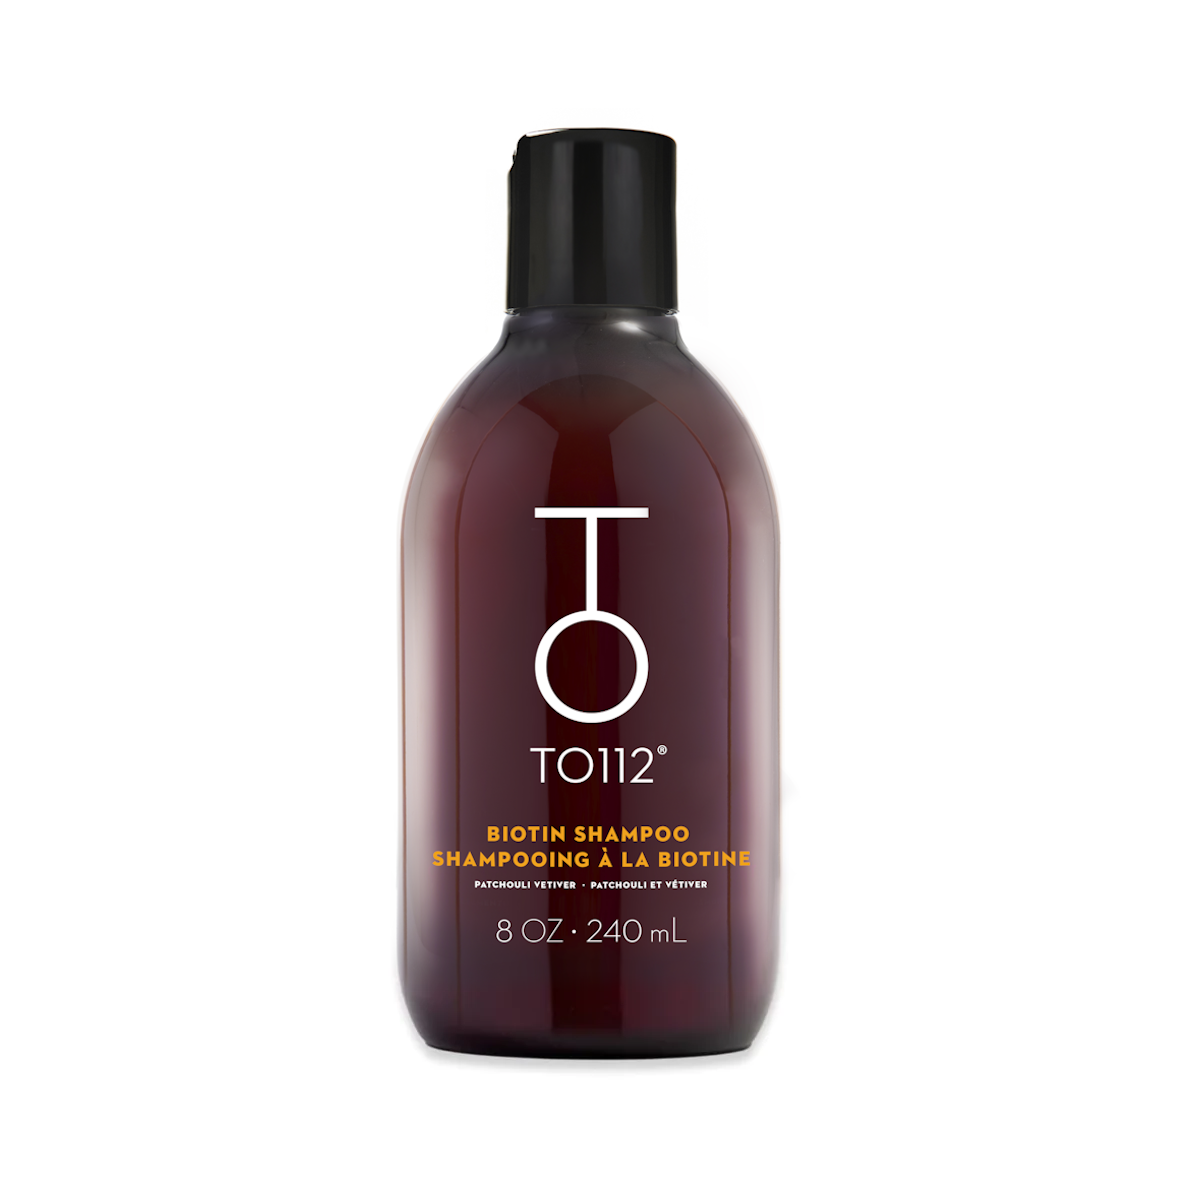 Biotin Shampoo from TO112 - 8oz - 240mL hair growth shampoo in an amber bottle on a white background